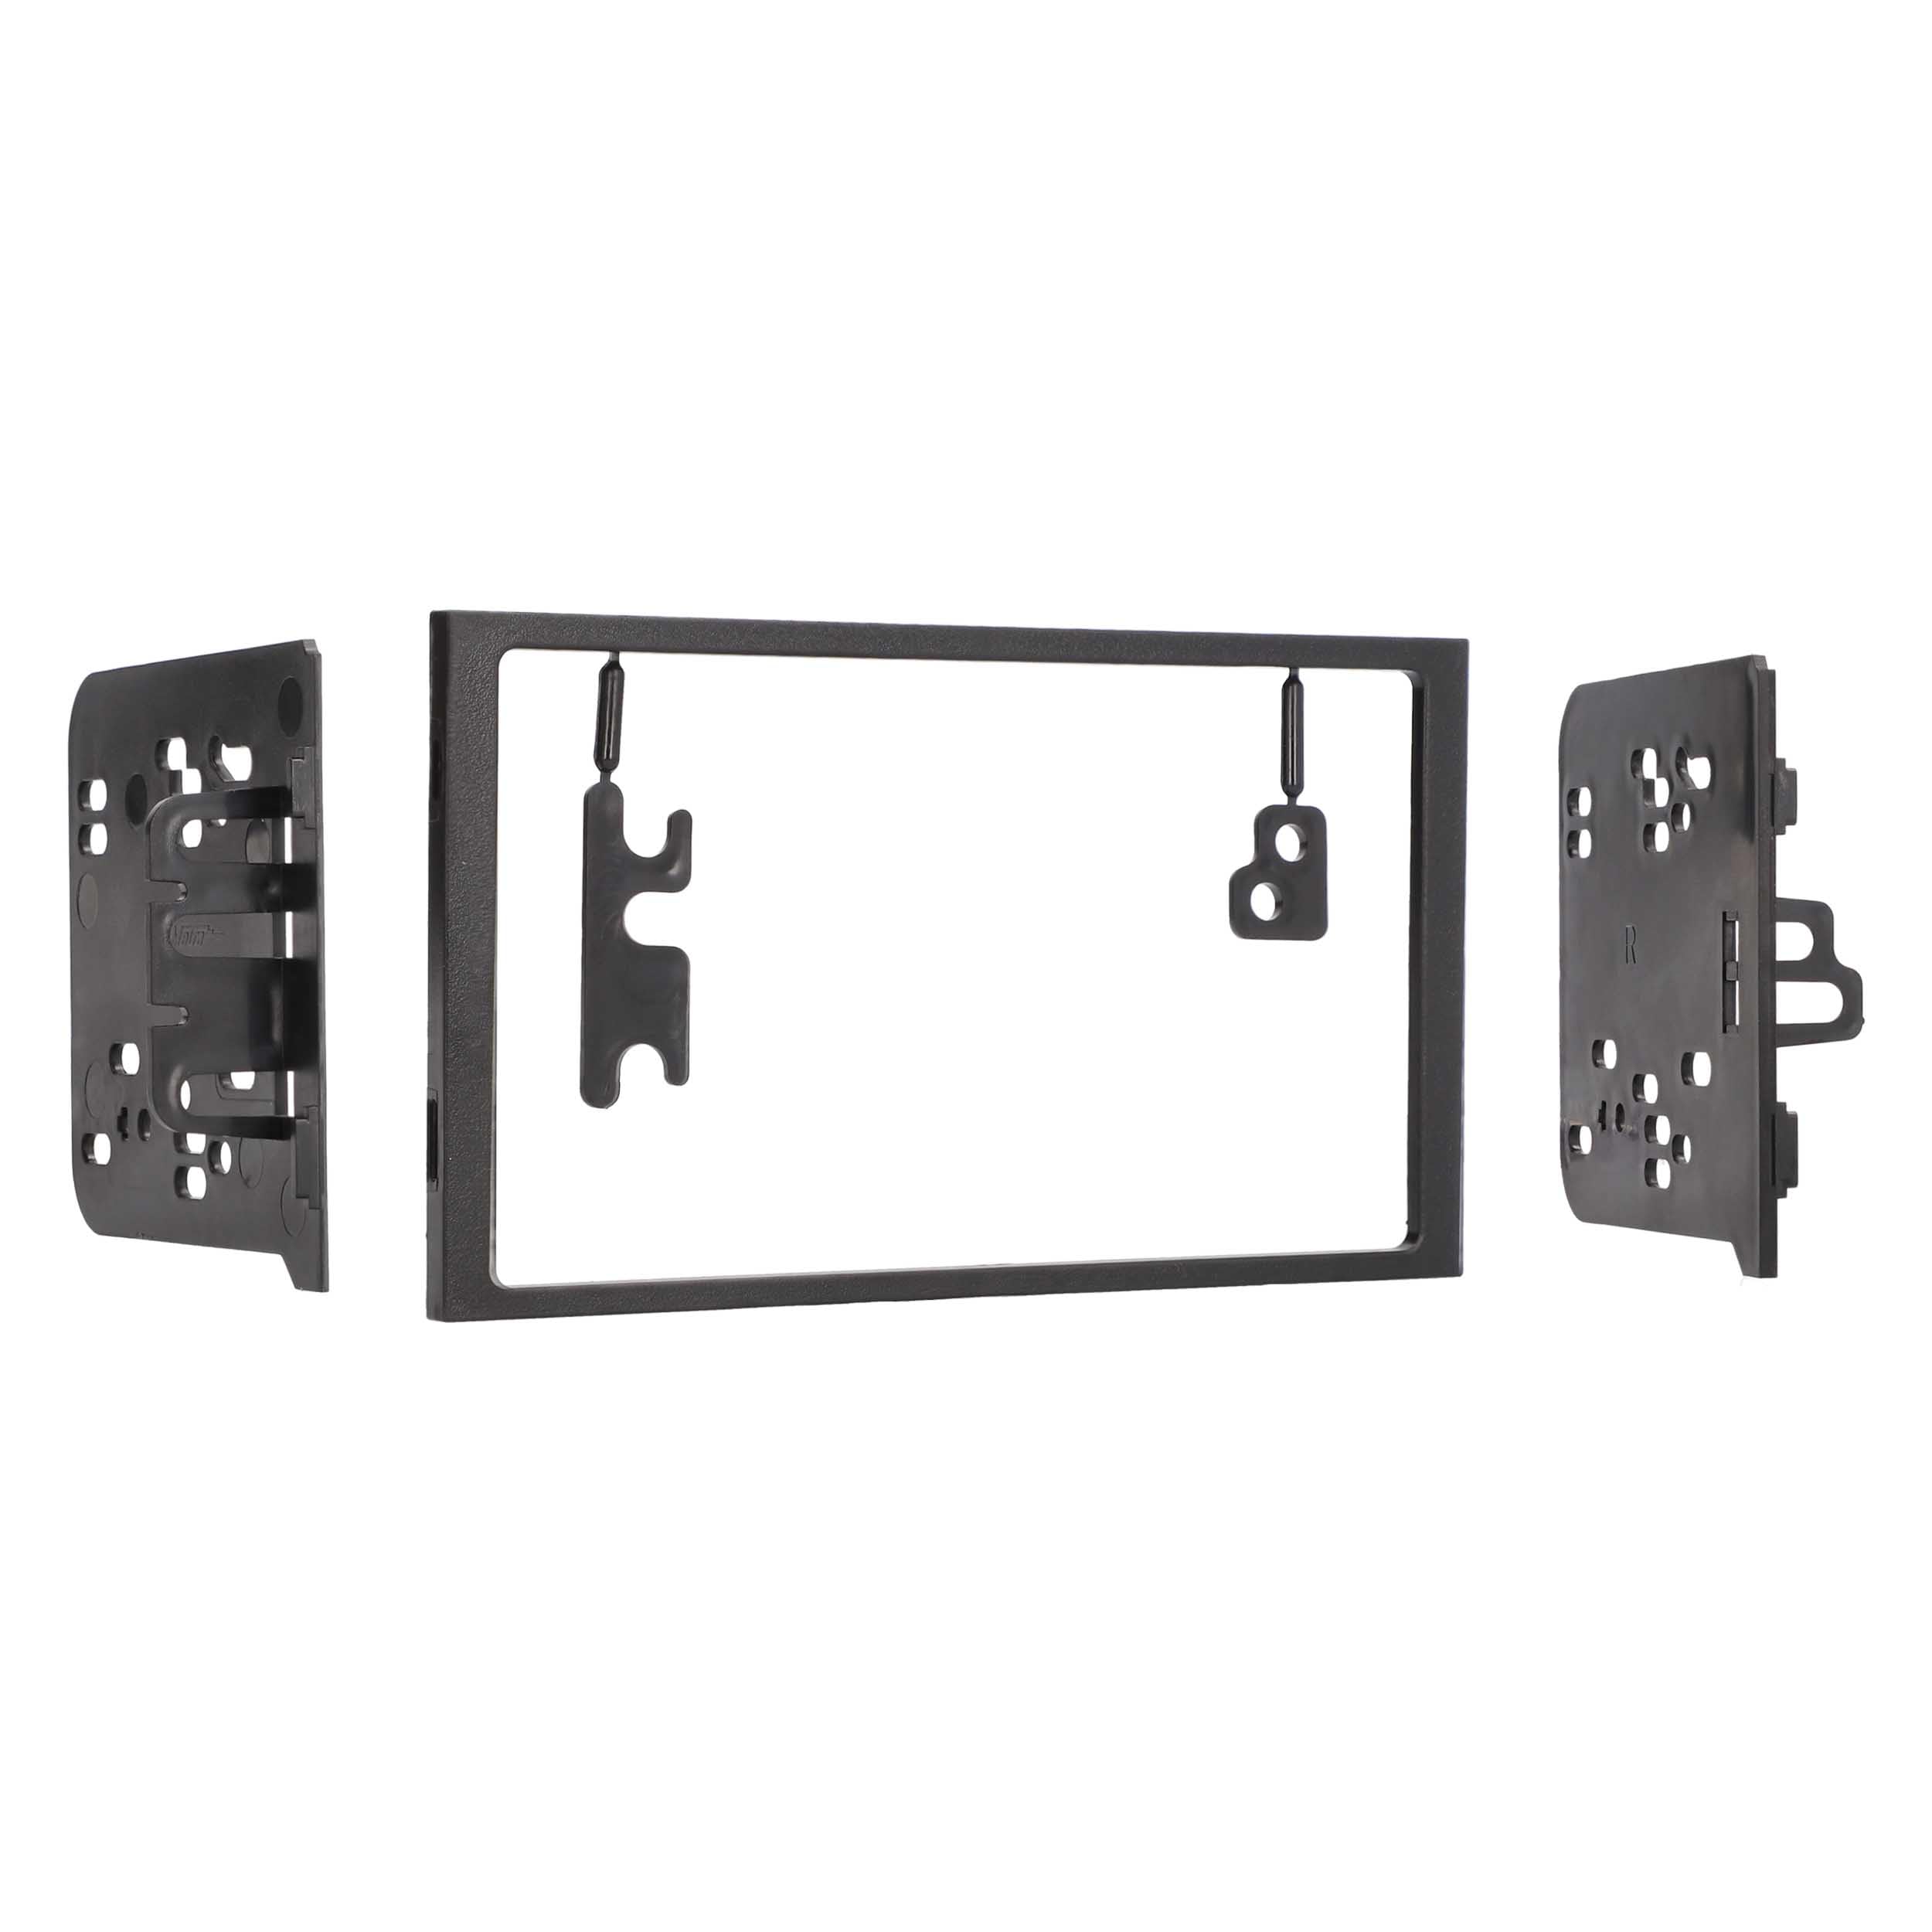 Metra Electronics 95-2001 Double DIN Installation Dash Kit for Select 1994 - 2012 GM Vehicles (packaging may vary)